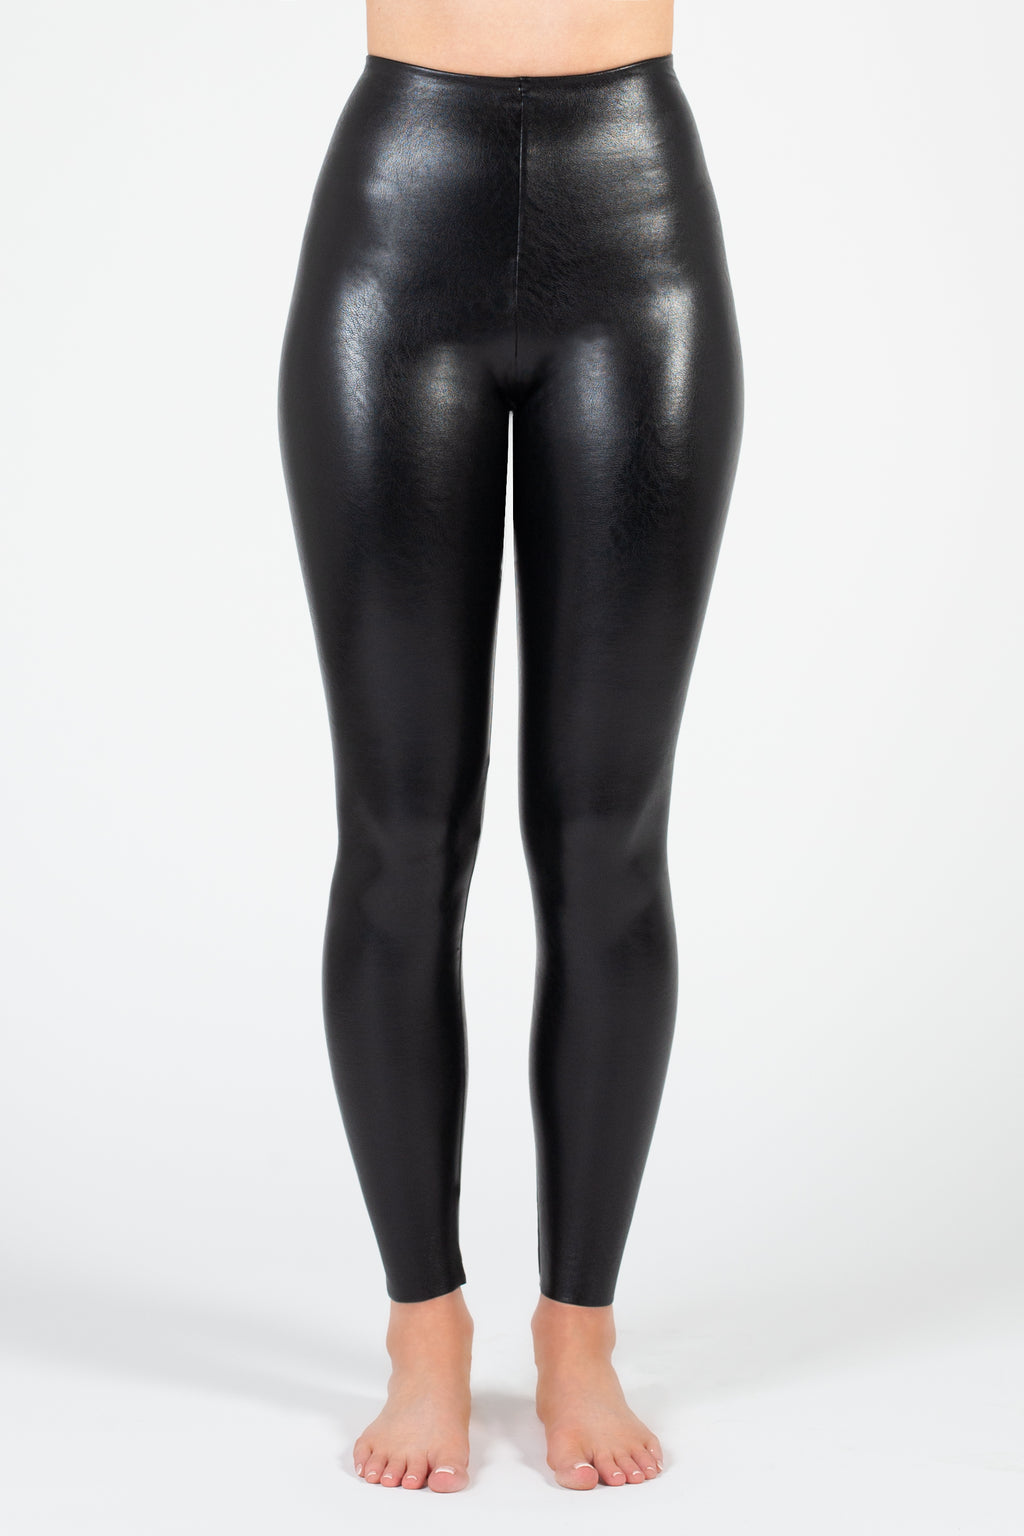 Buy commando Women's Perfect Control Faux Leather Leggings, Sand, Small at